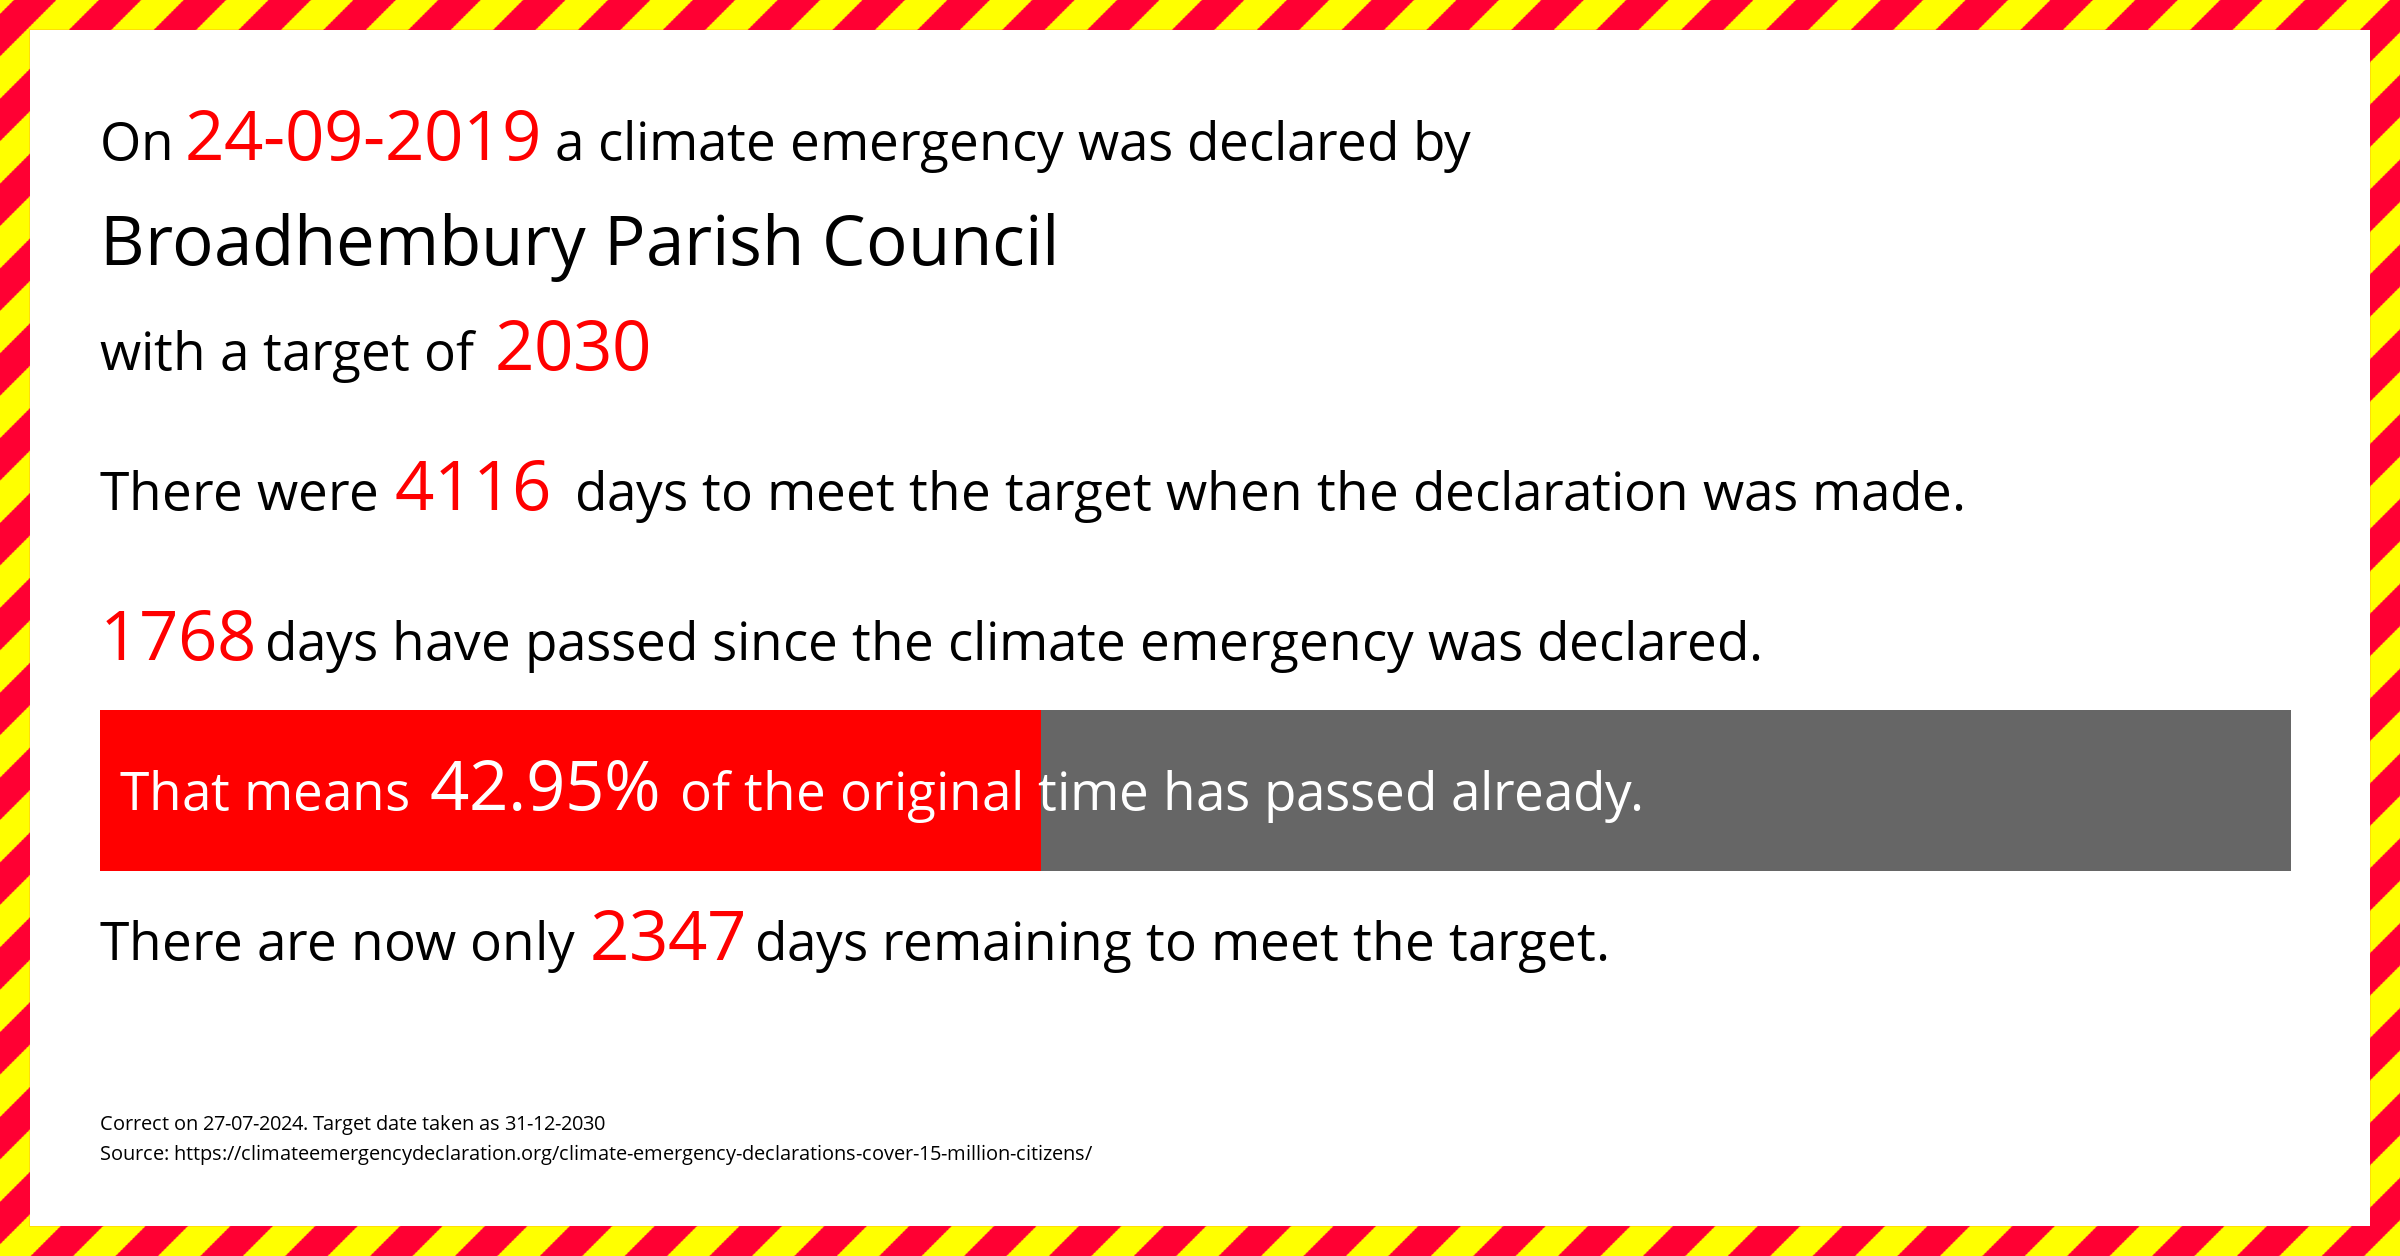 Broadhembury Parish Council declared a Climate emergency on Tuesday 24th September 2019, with a target of 2030.